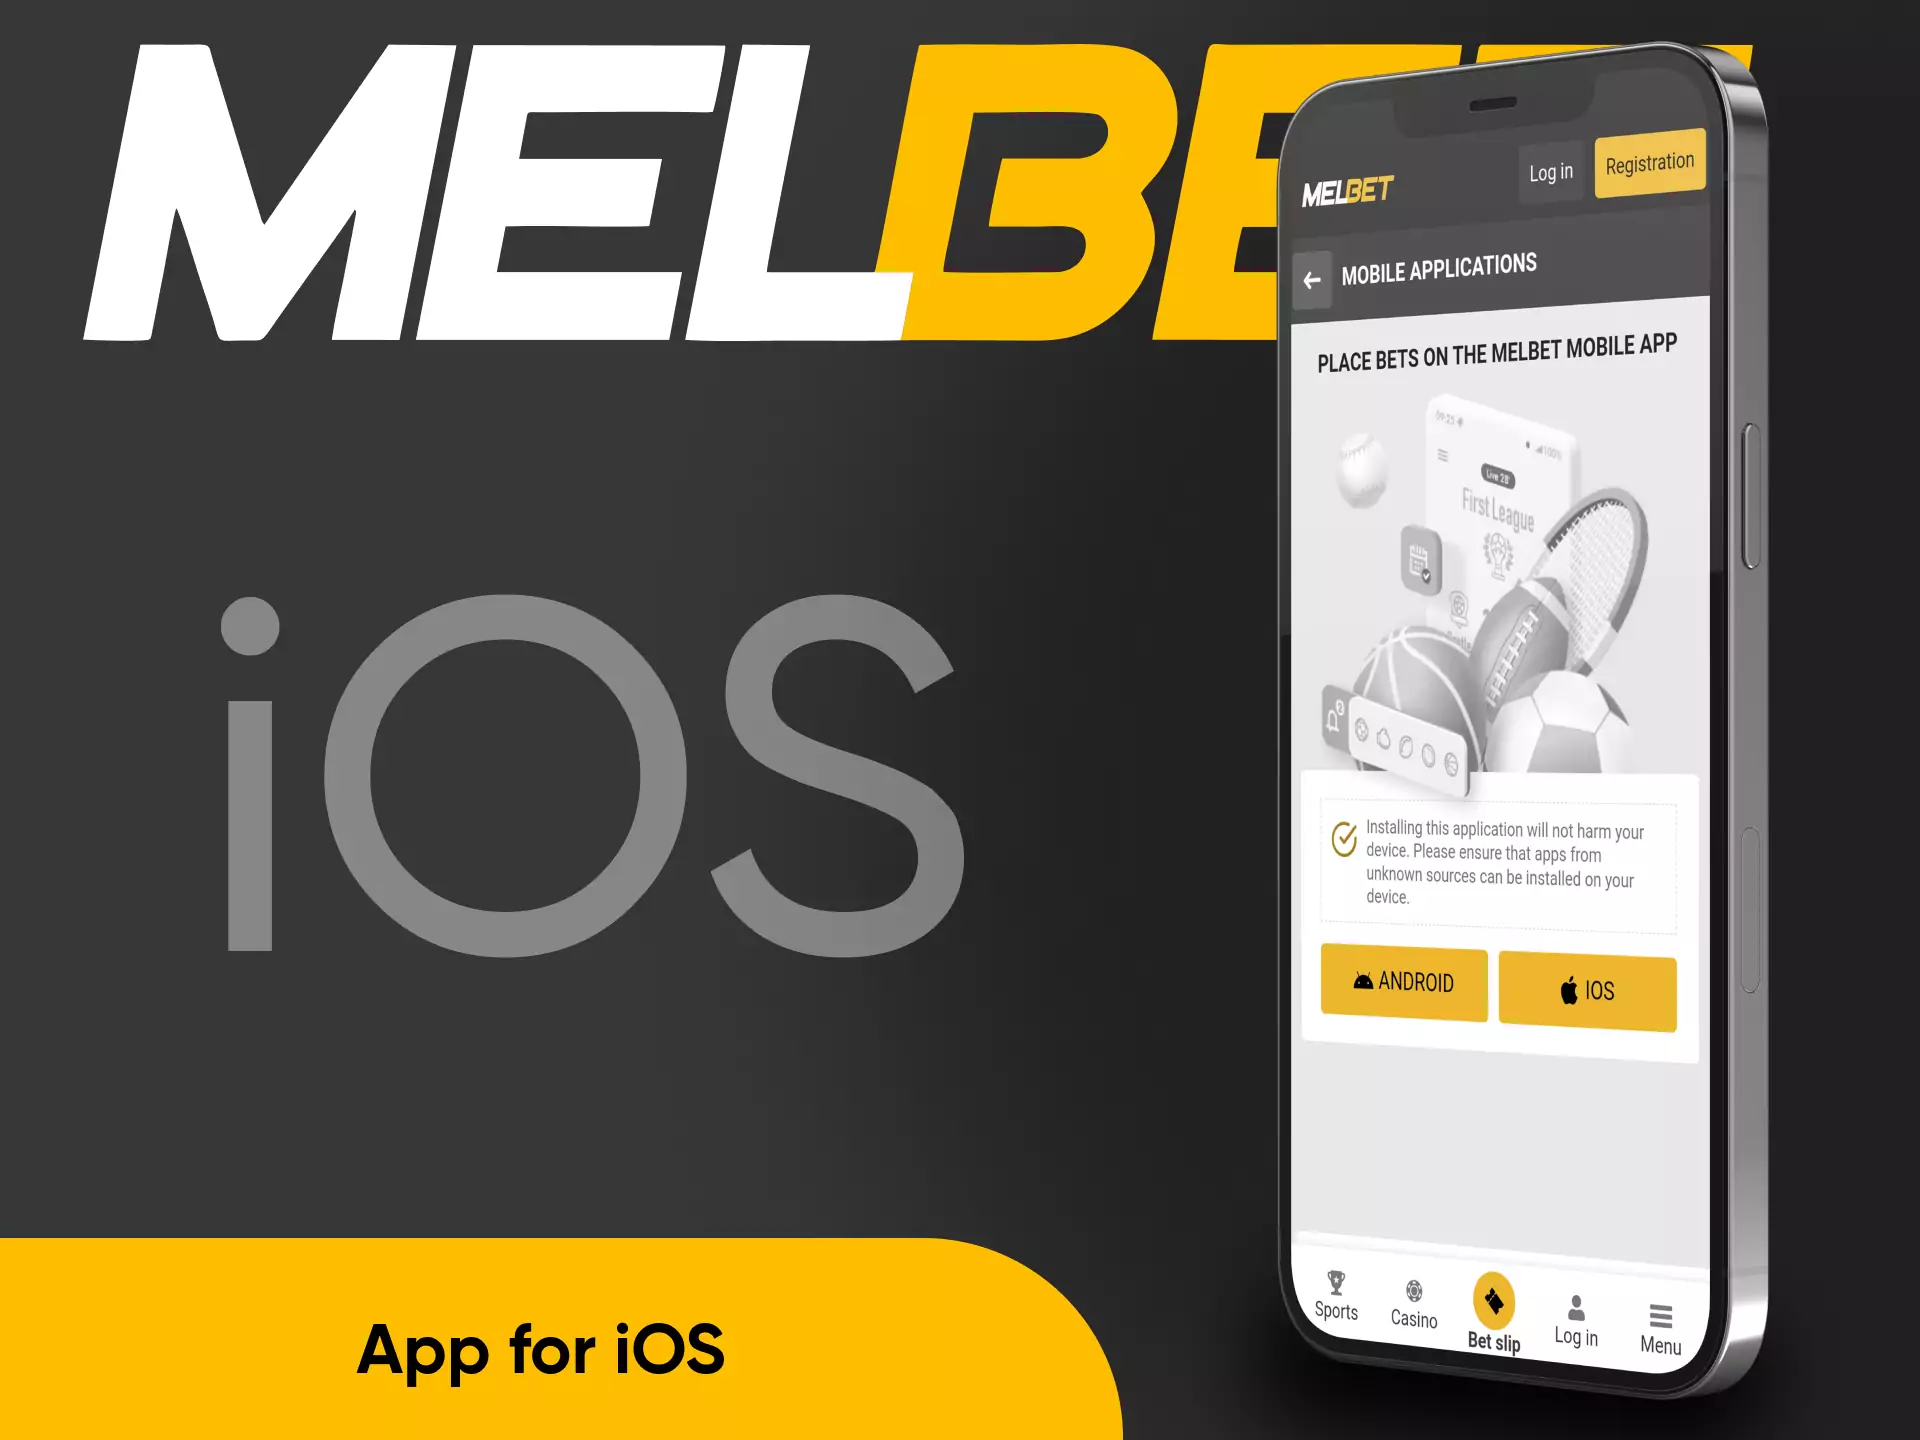 For iOS devices, download the Melbet app from the App Store.